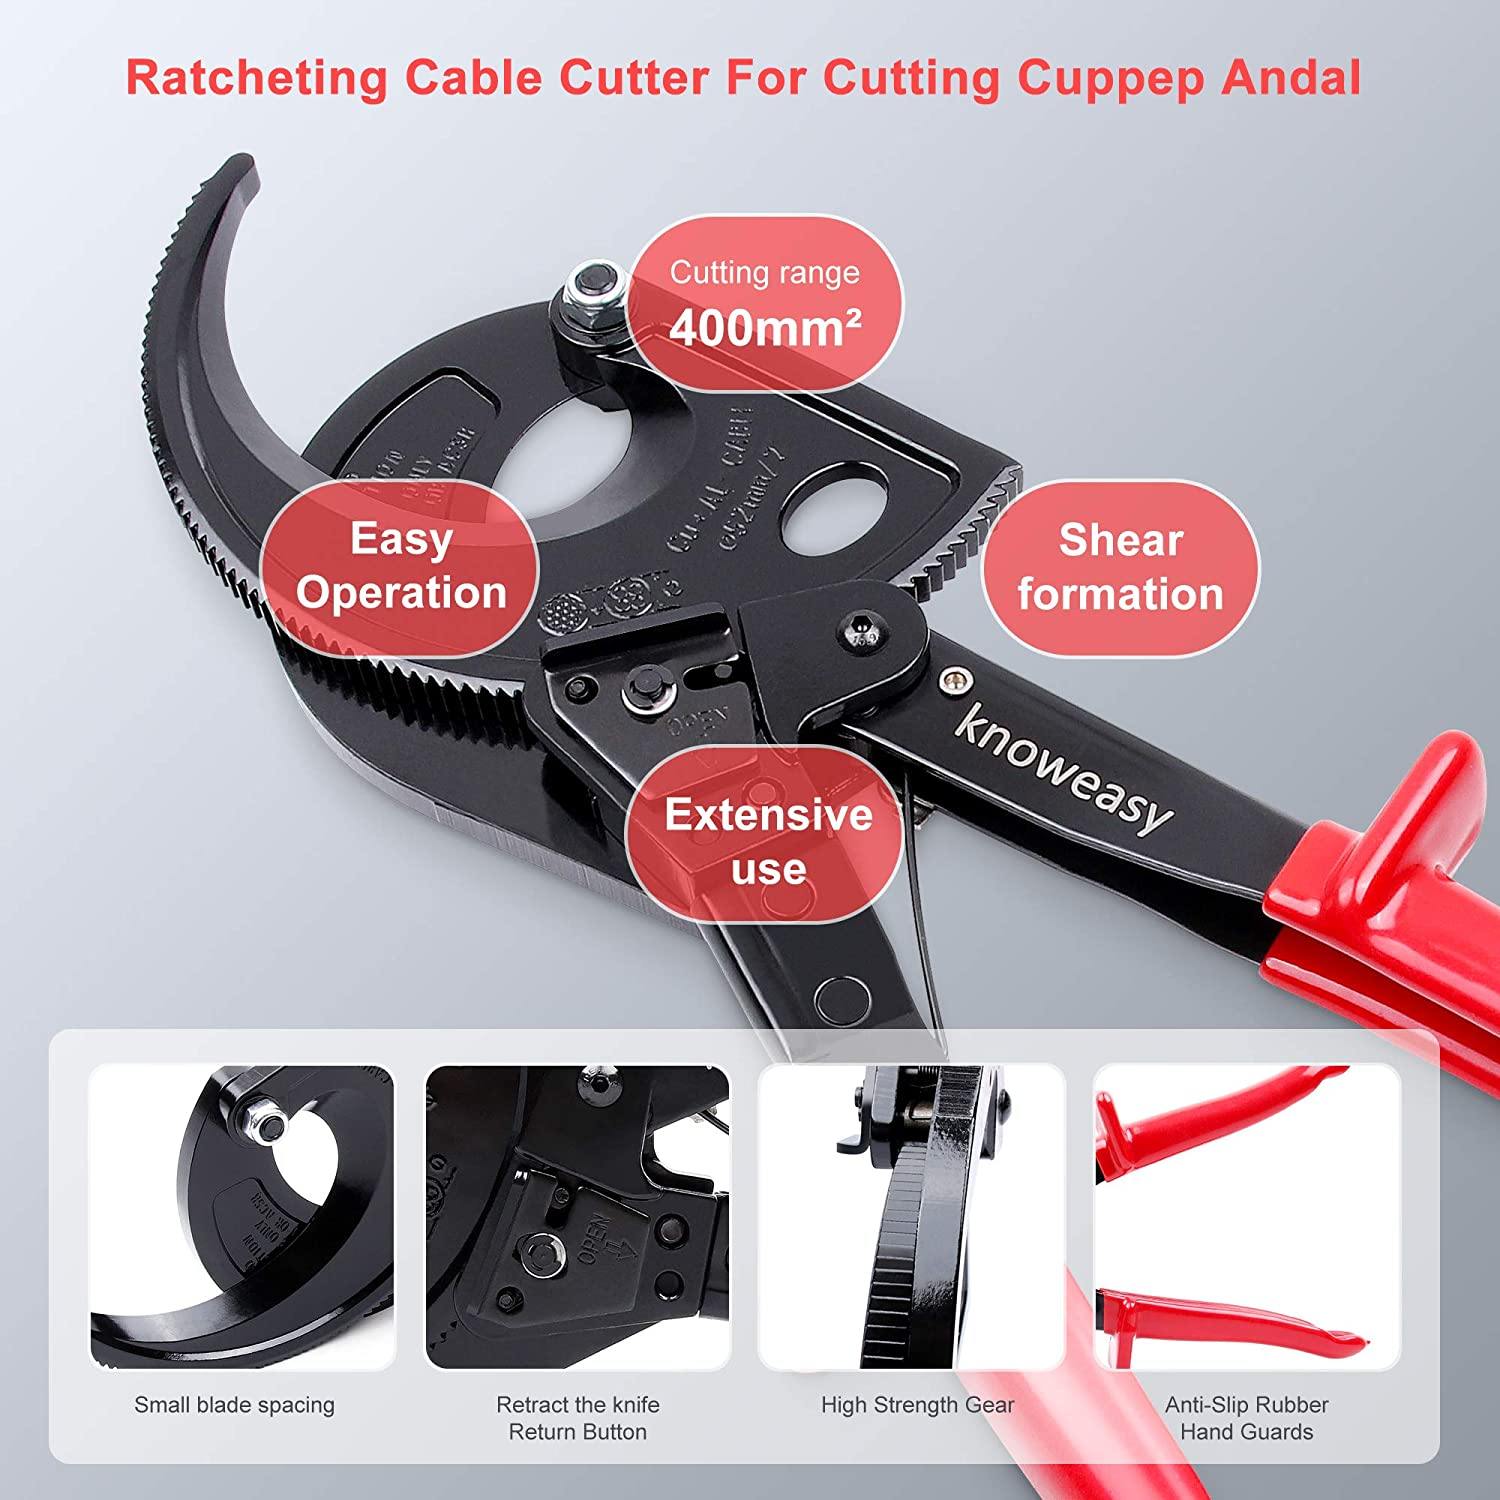 Aluminum Copper Ratchet Cable Cutters,Wire Cutters for Cutting Electrical Wire